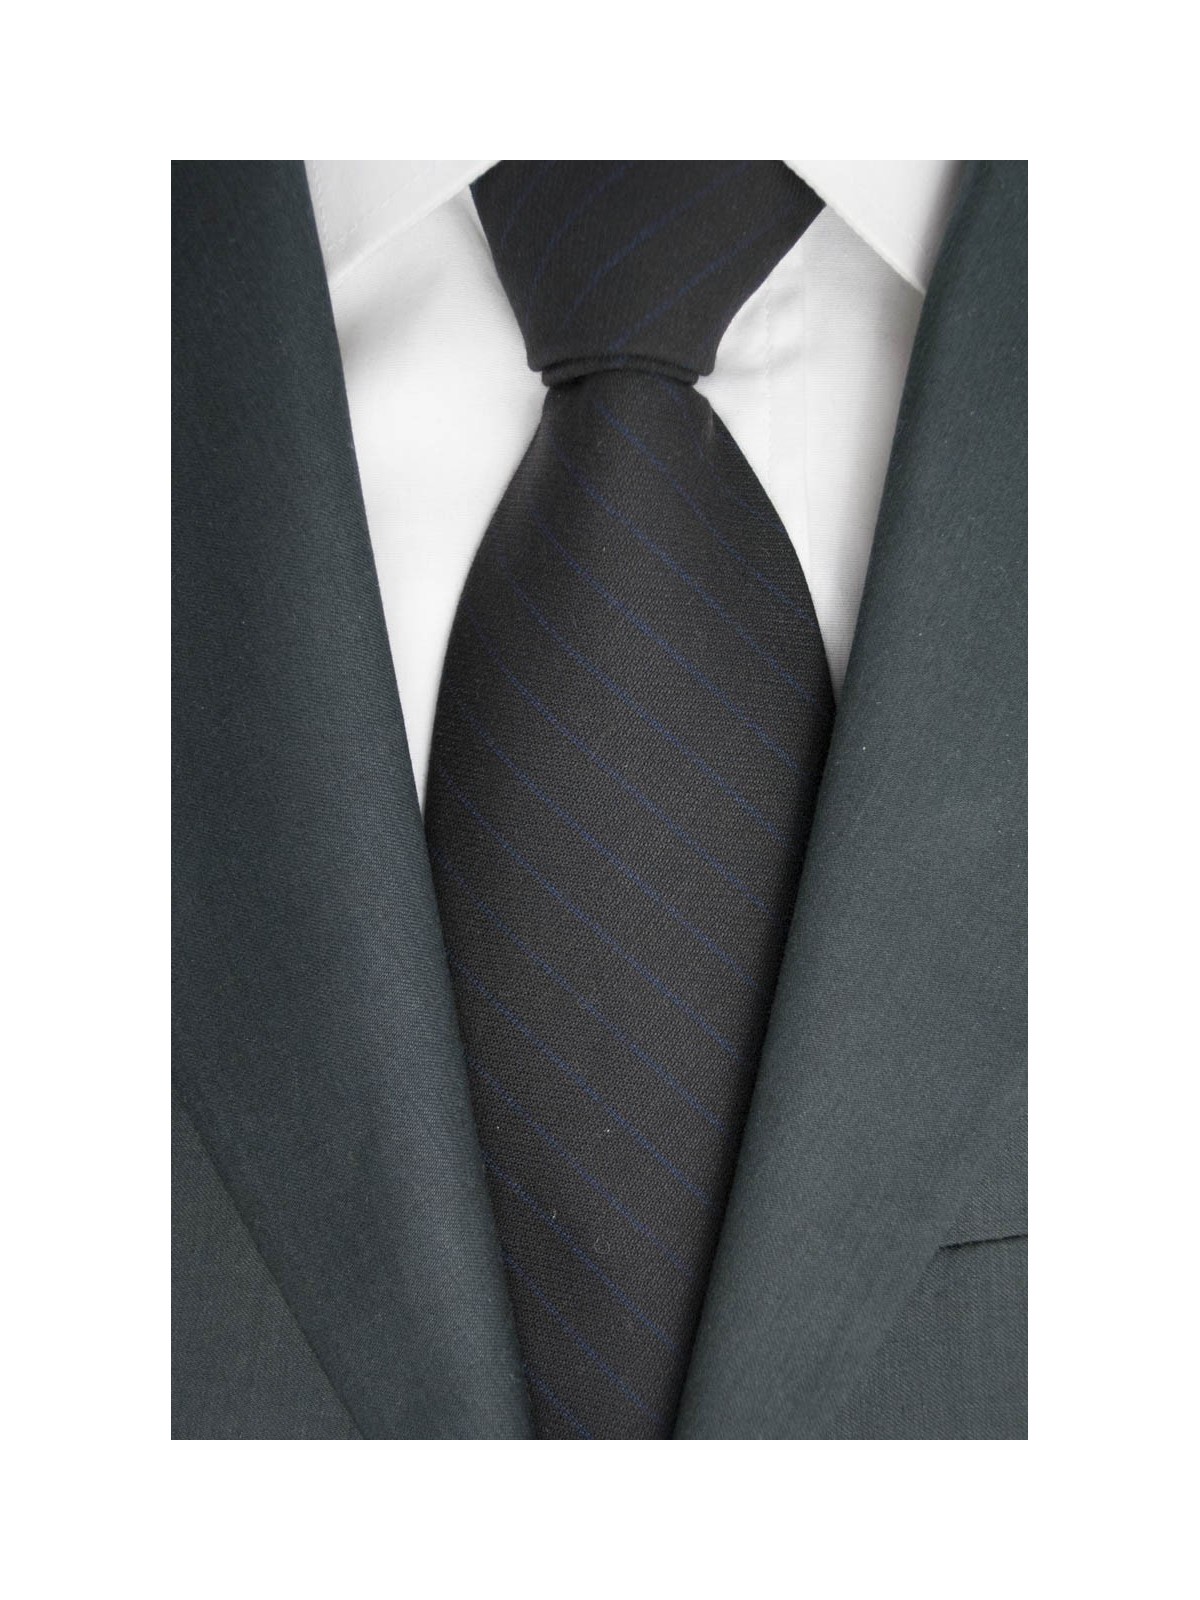 Tie Black Regimental Blue Cacharel - 100% Pure new Wool - Made in Italy